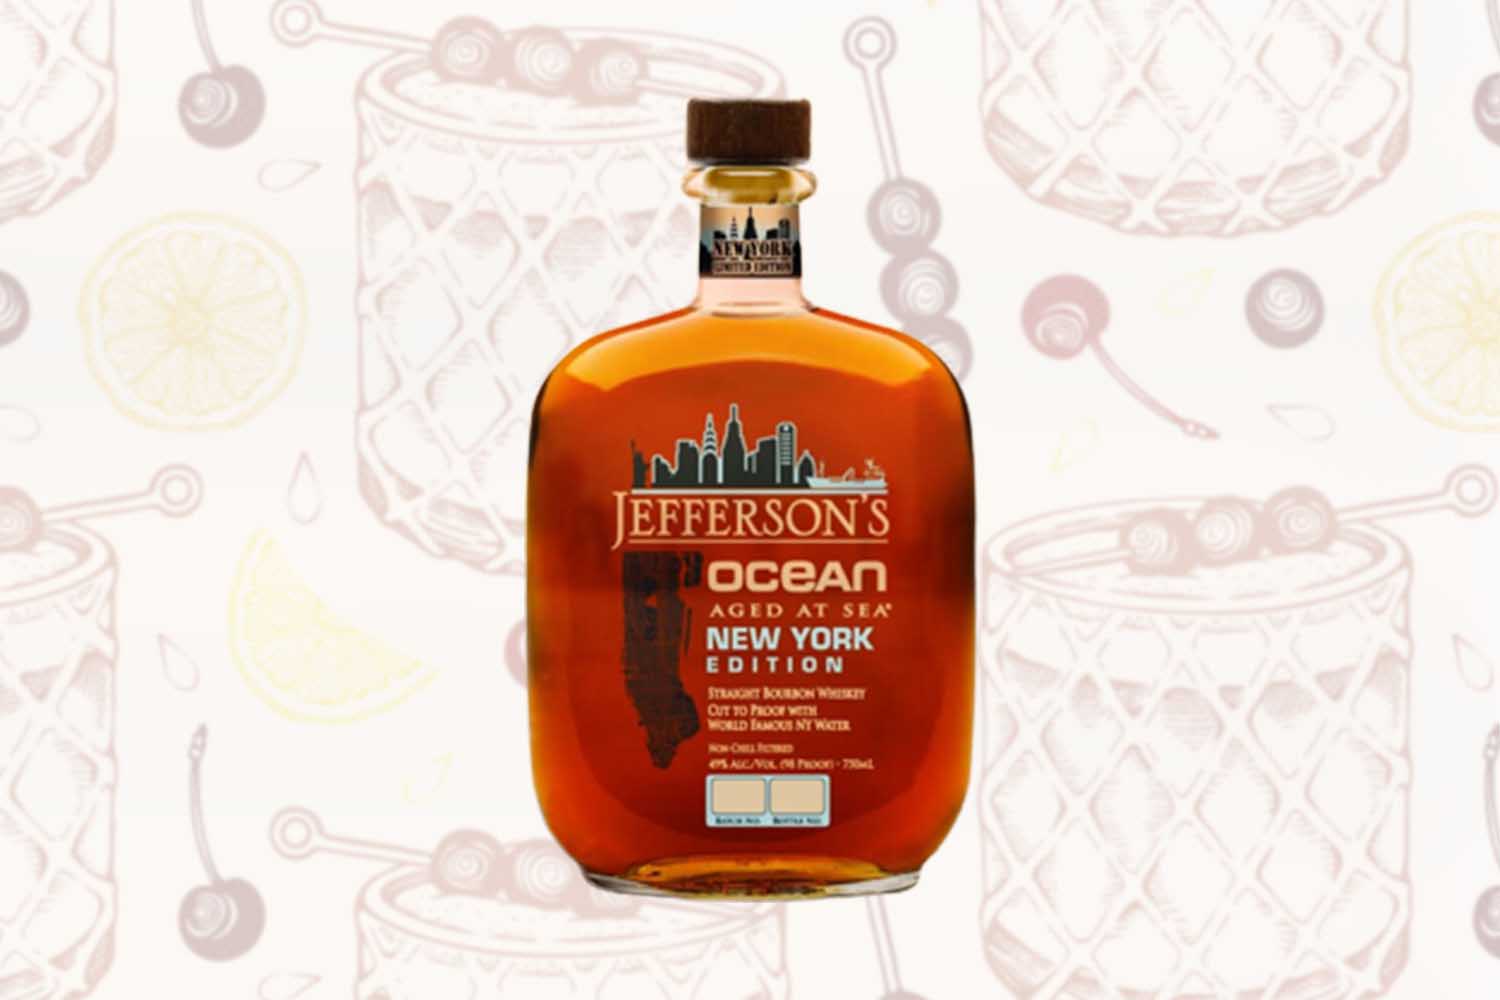 Jefferson’s Ocean Aged at Sea New York Edition